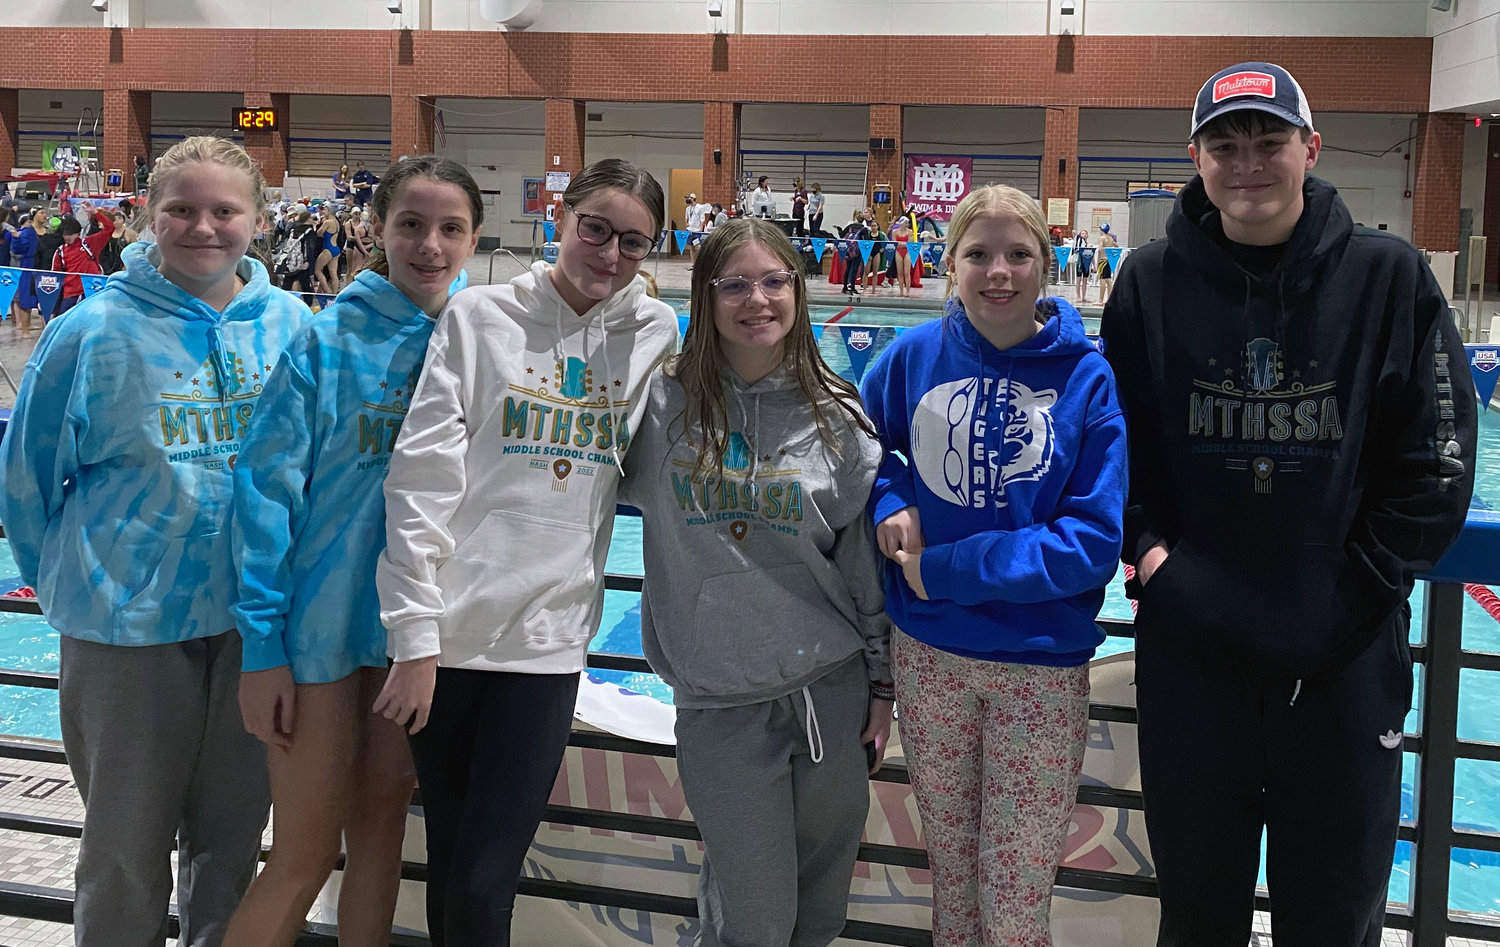 Middle school swimmers who competed in Saturday’s state meet are Anna Kate Bass, Addison Allen, Olympia Cathey, Abigail Terrell and T.J. Ries.